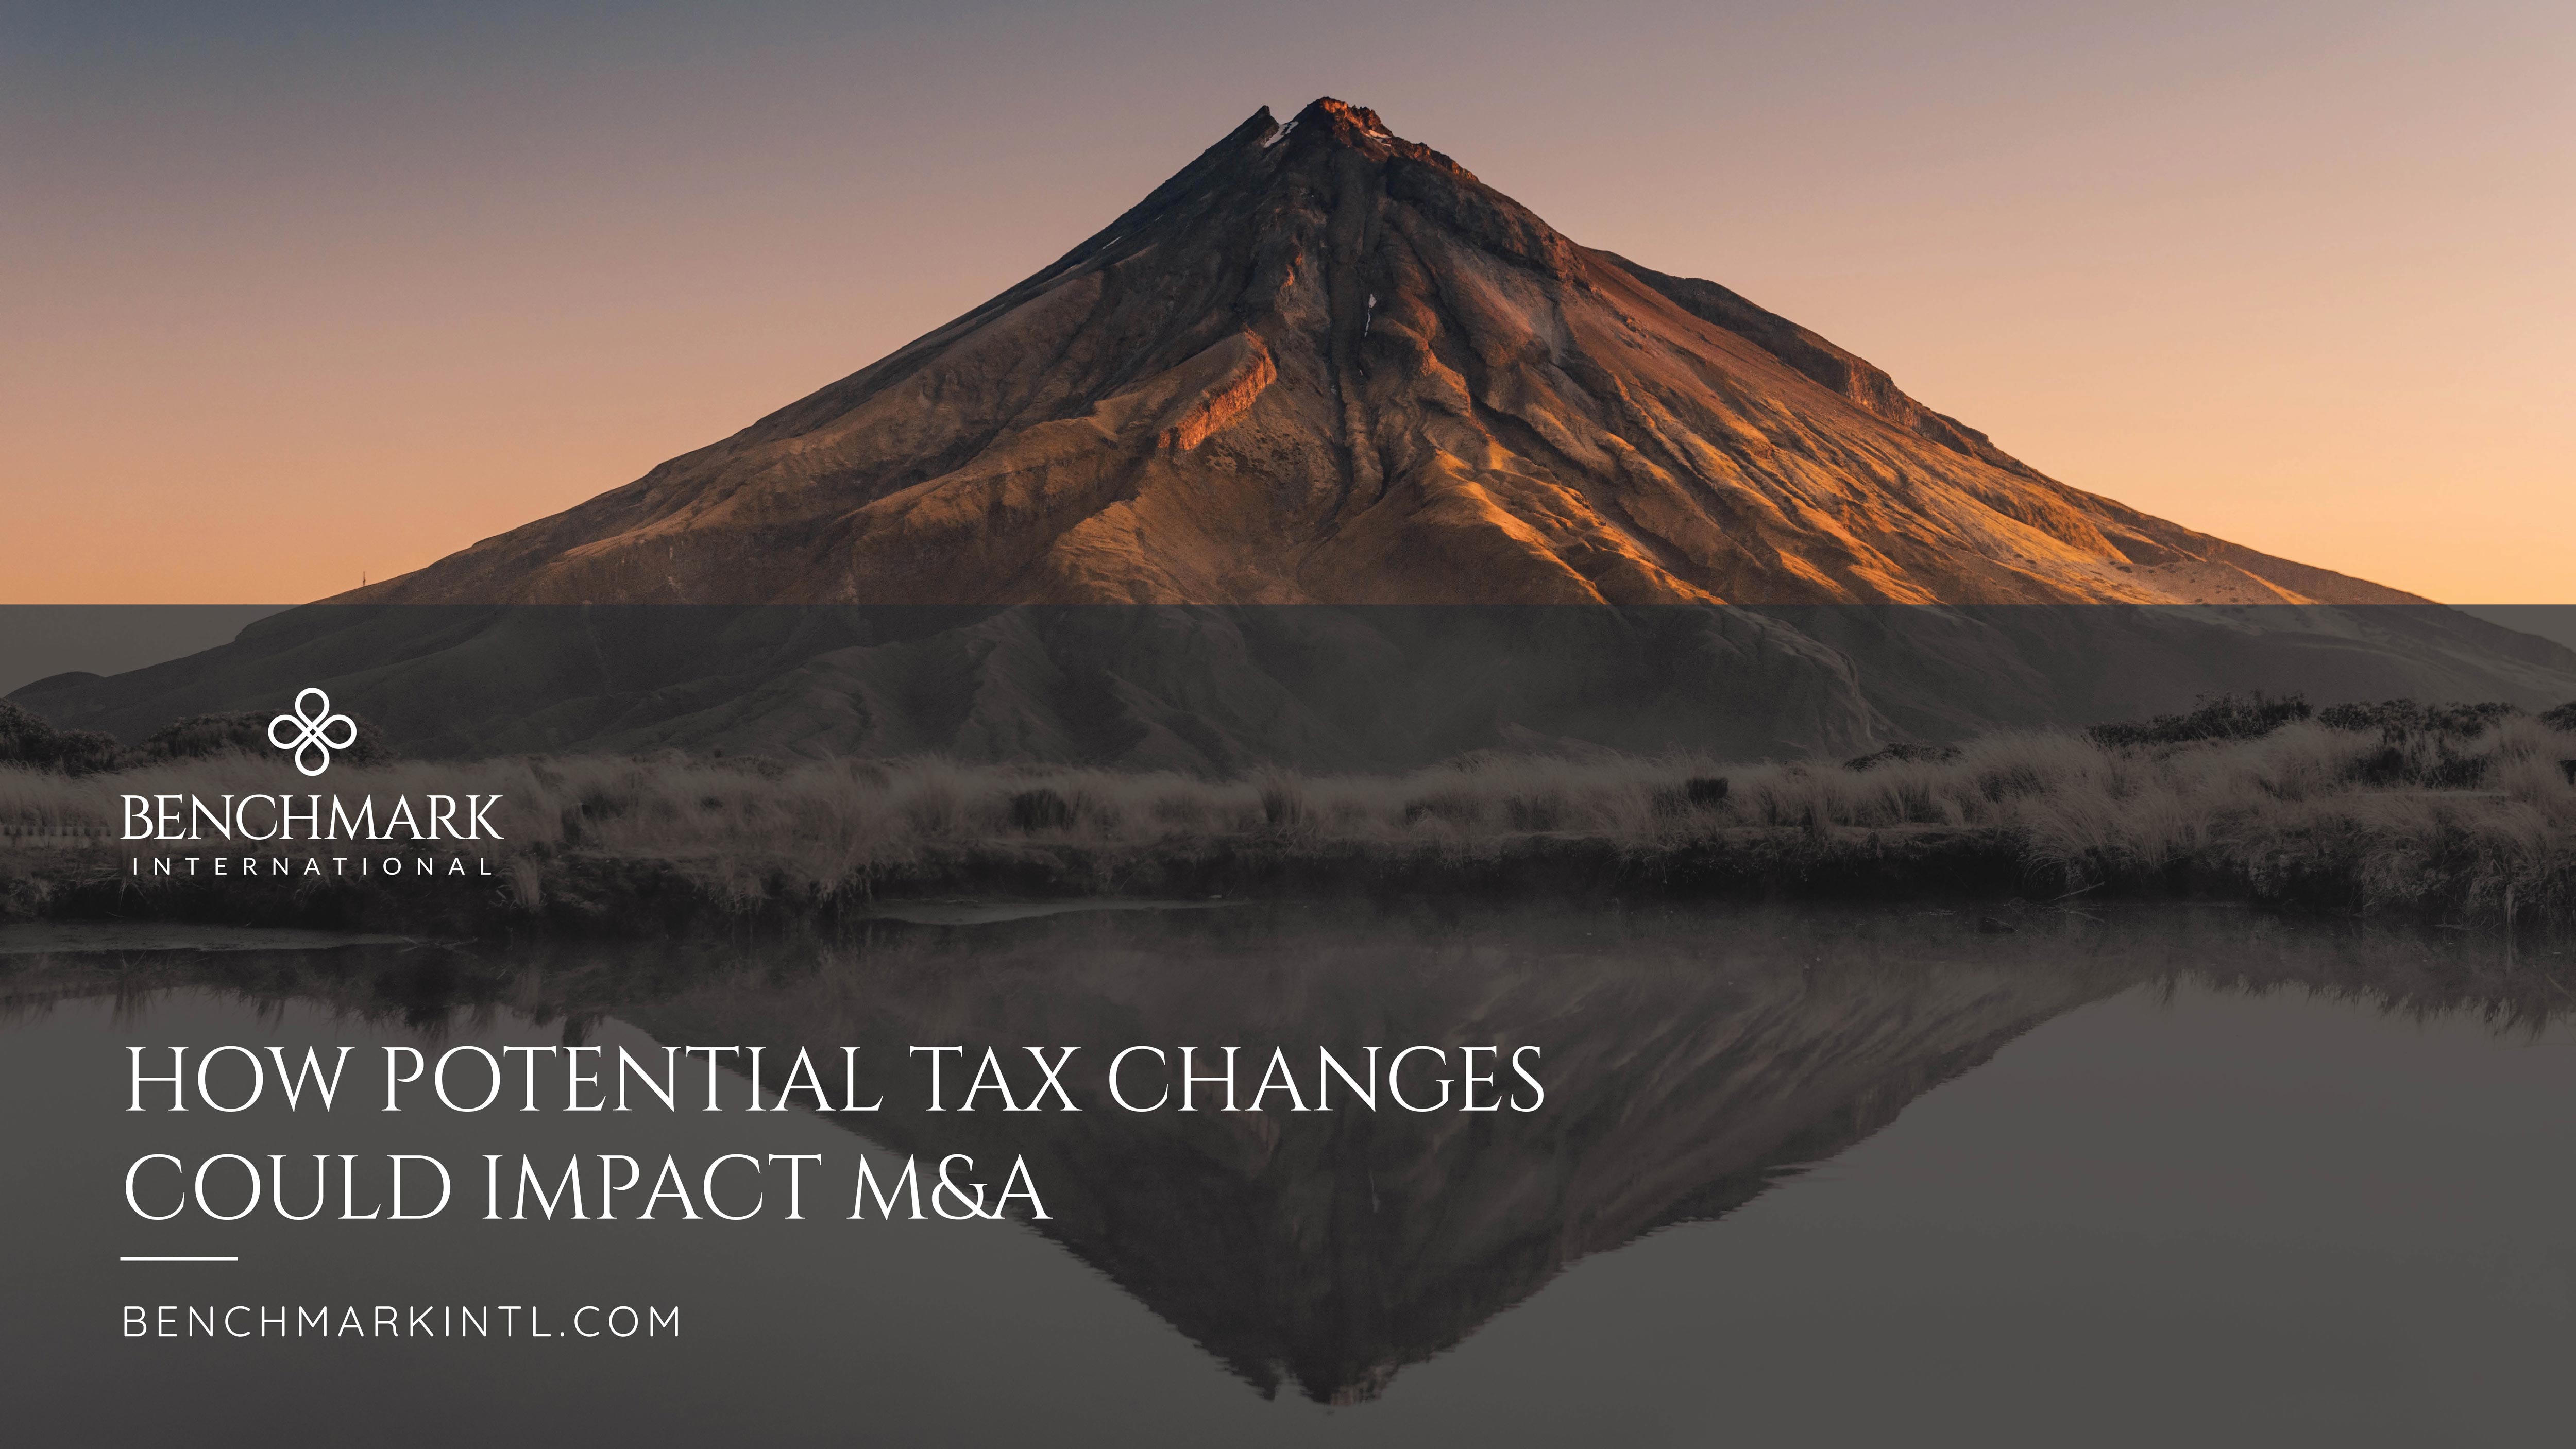 How Potential Tax Changes Could Impact M&A